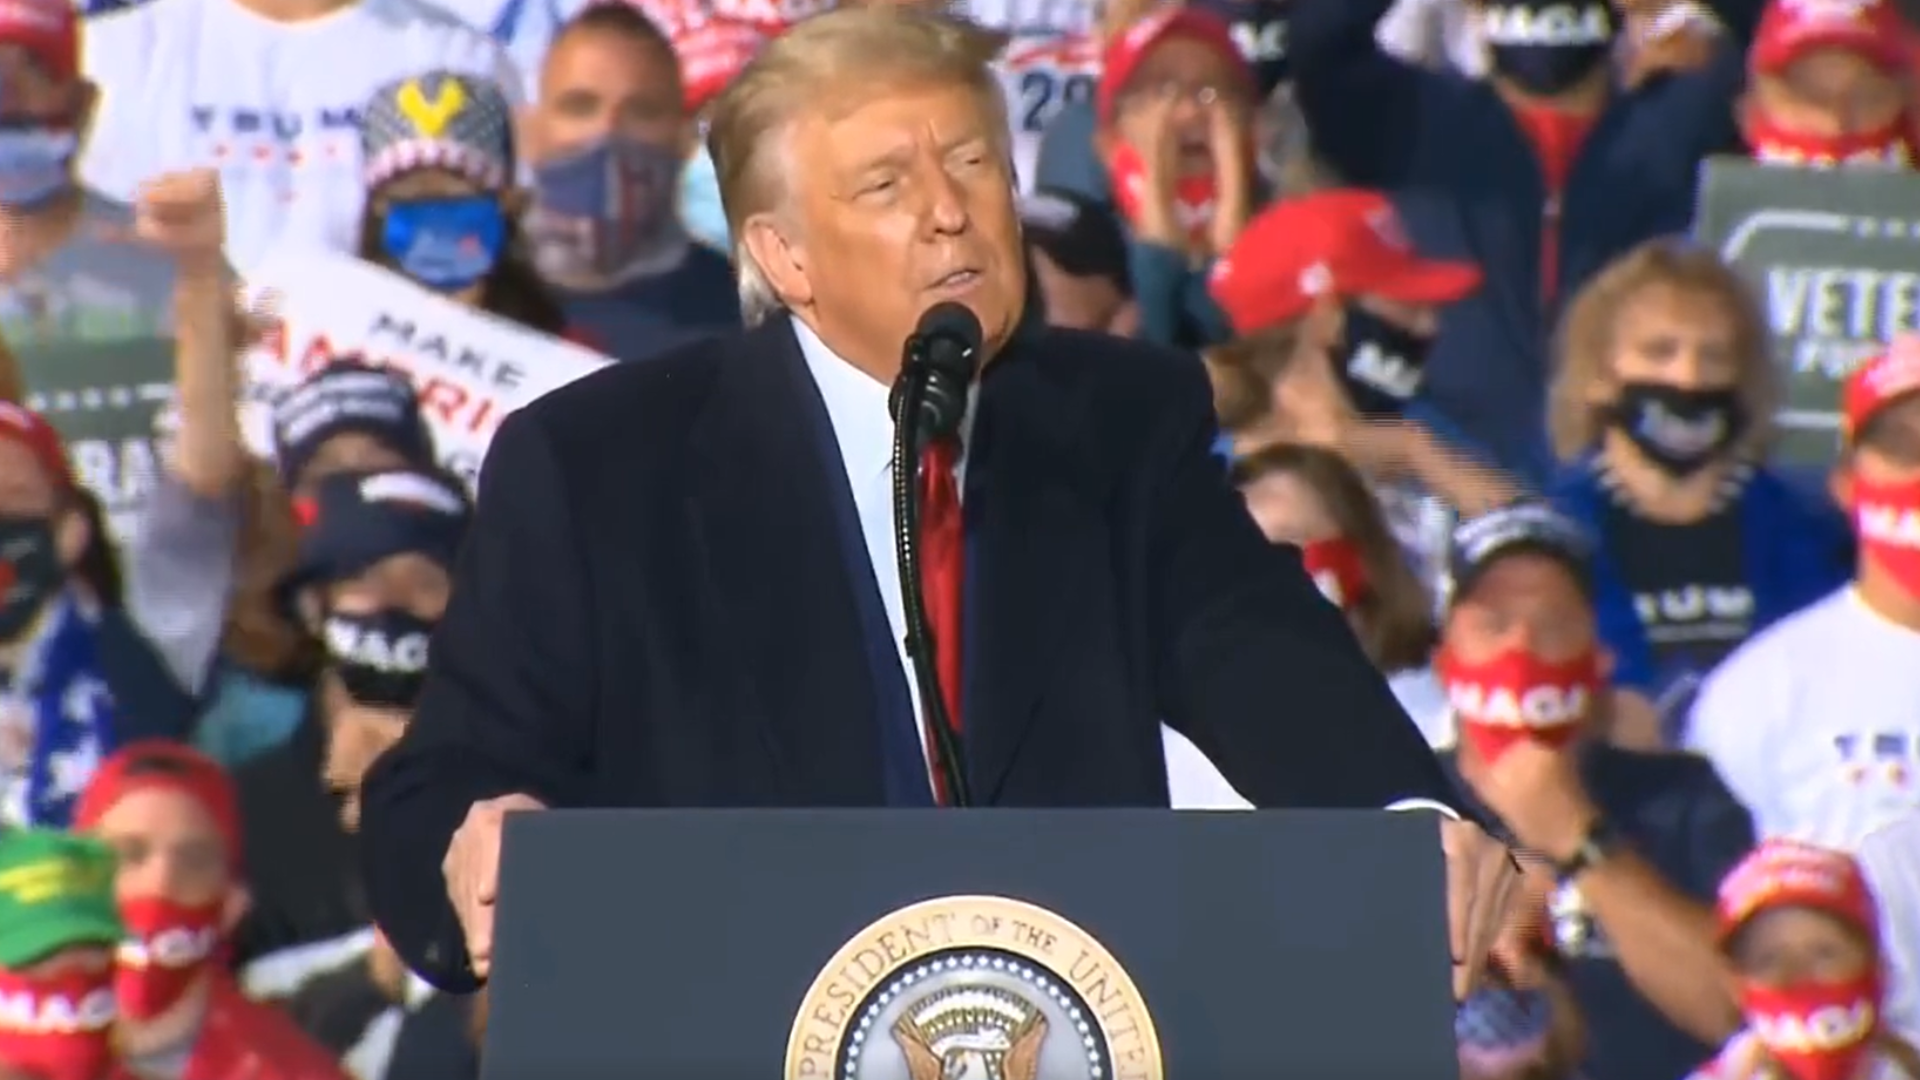 WTOL recaps the day's events, hearing from supporters and detractors, with full coverage of President Trump's campaign stop at Eugene F. Kranz Toledo Express Airport